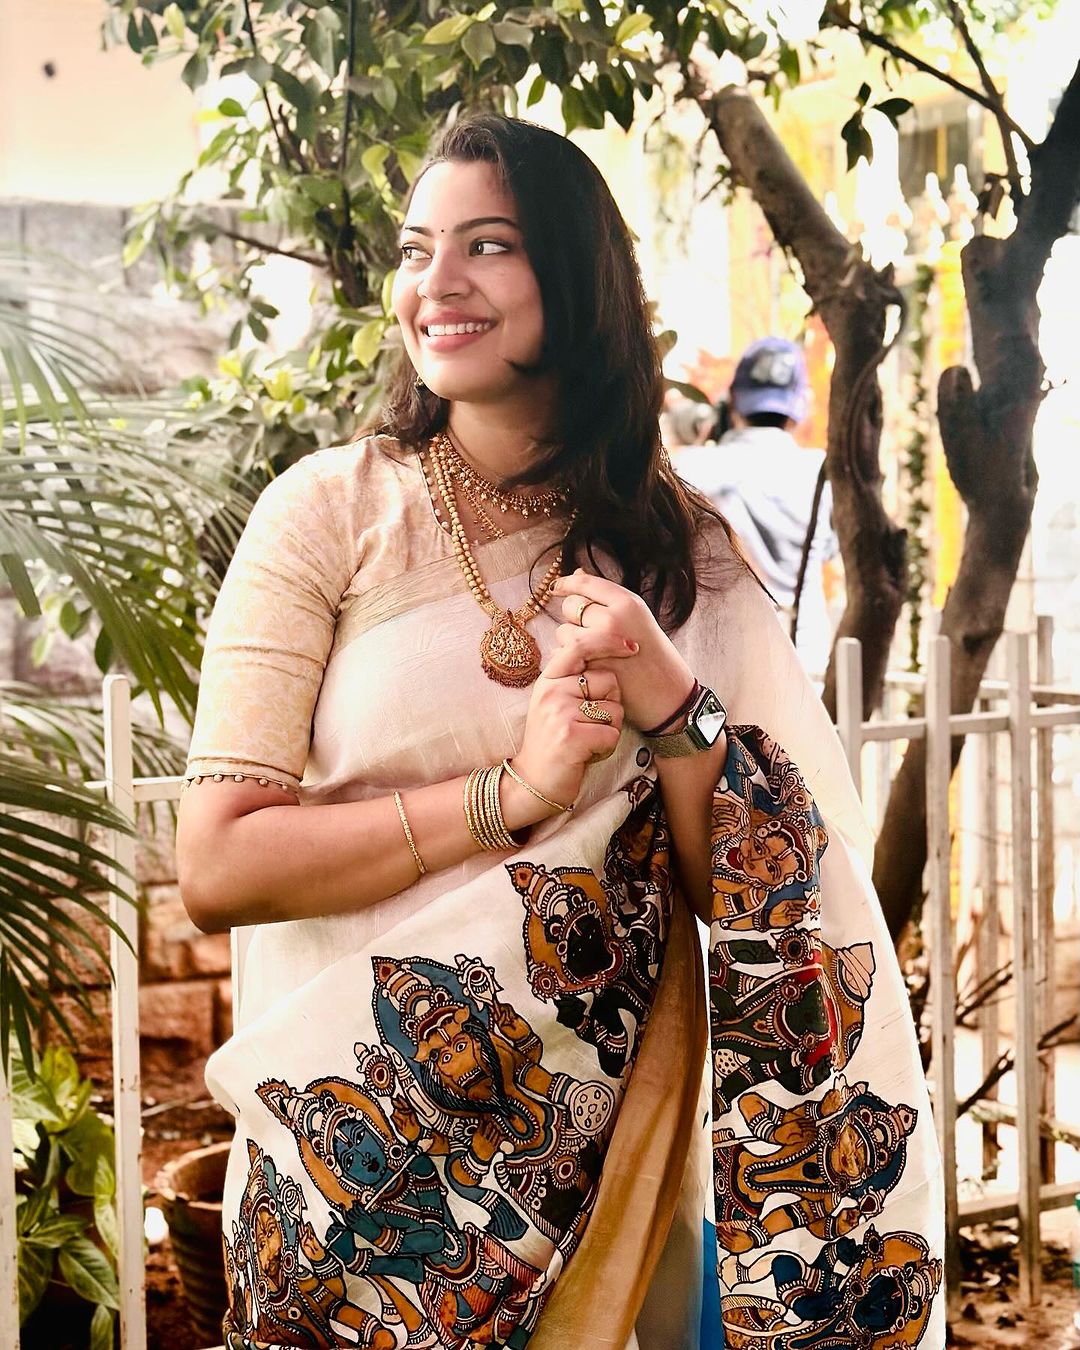 Singer geetha madhuri latest hd images-Actressgeetha, Geetha Madhuri, Geethamadhuri Photos,Spicy Hot Pics,Images,High Resolution WallPapers Download